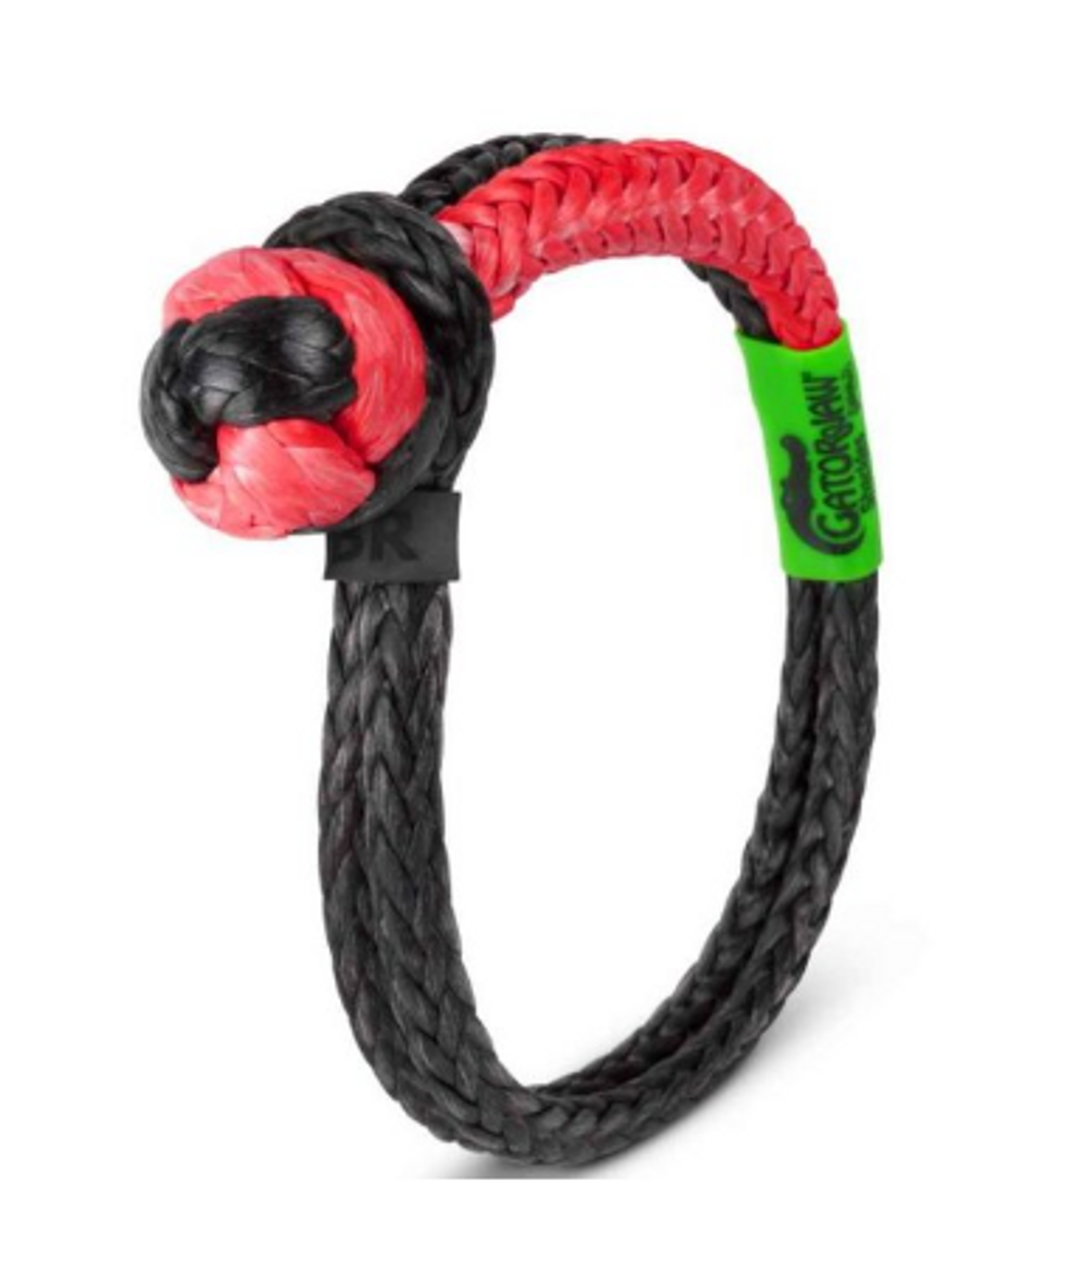 Bubba Rope 176746NGRB 3/8" NexGen Gator-Jaw Synthetic Shackle in Red & Black